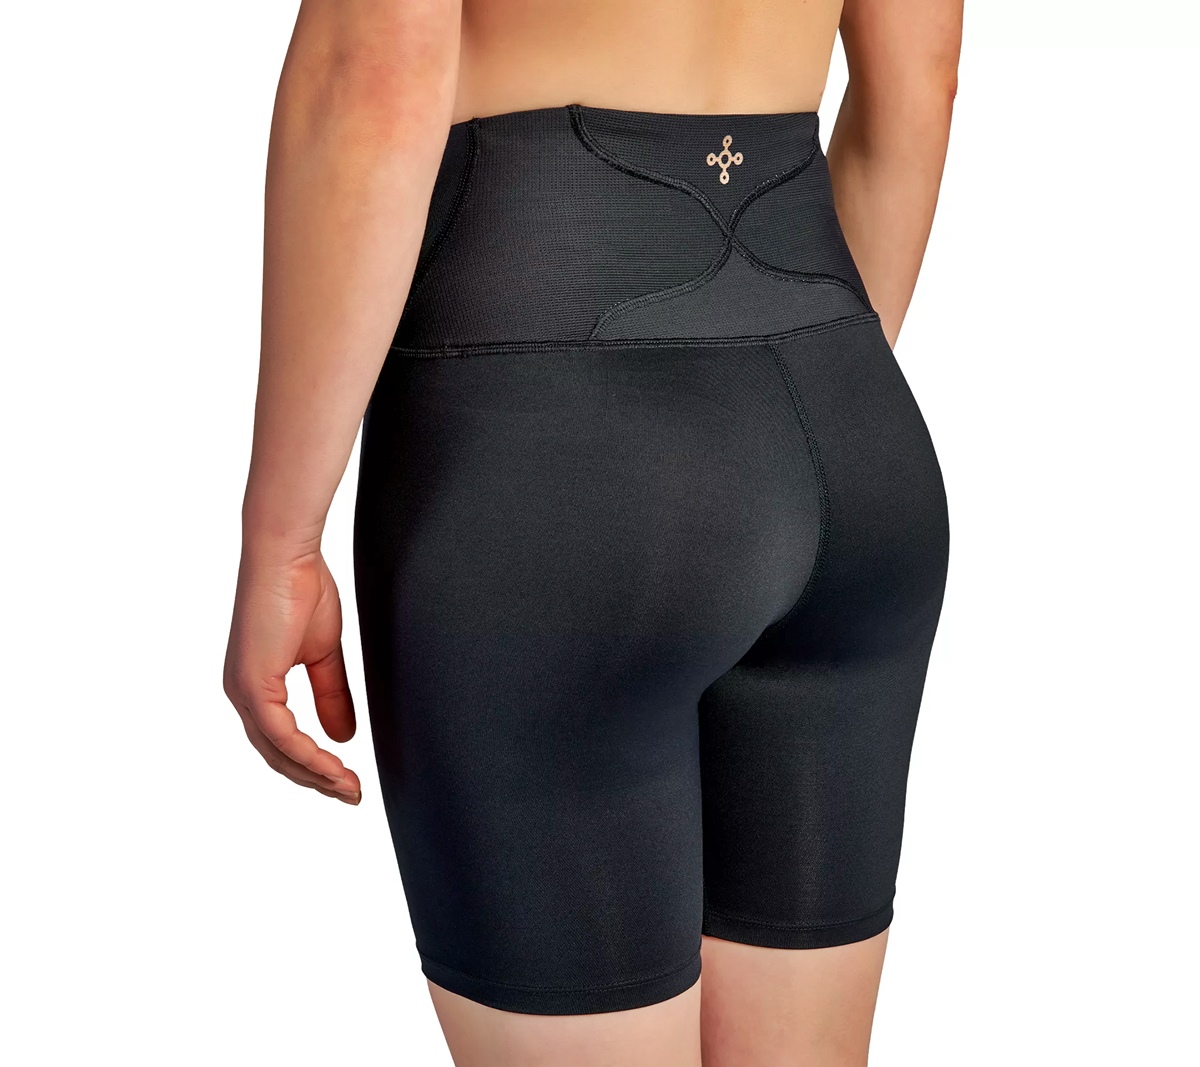 12 Amazing Tommie Copper Women’s Compression Shorts For 2023